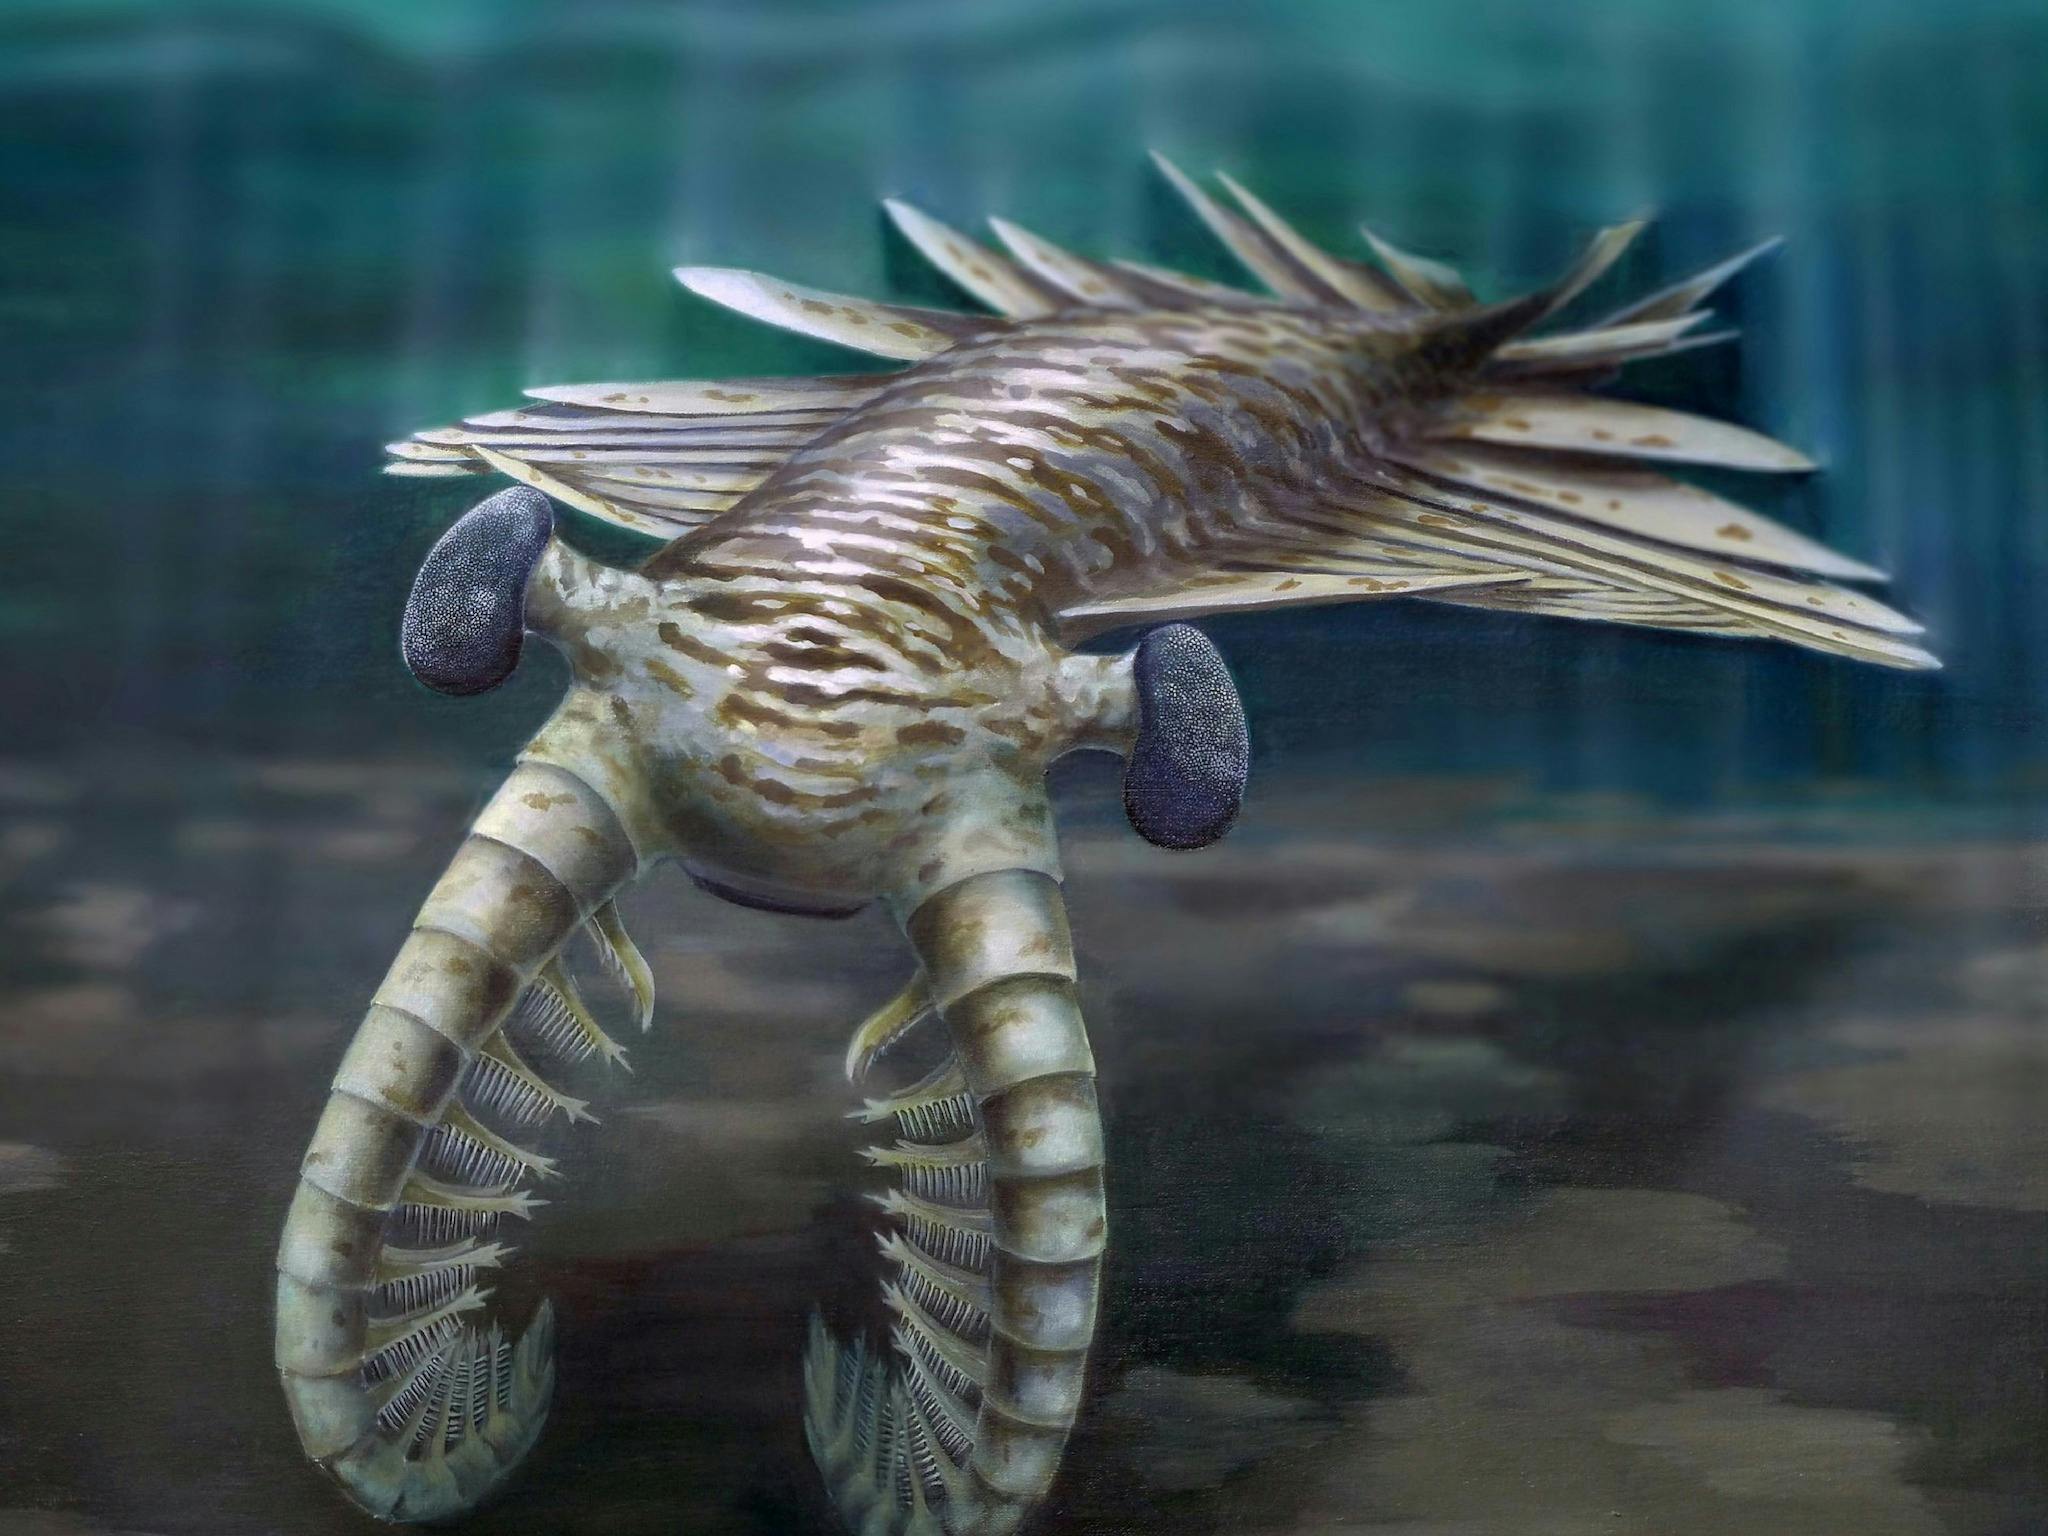 Cambrian Animals: Early complex animals at our doorstep